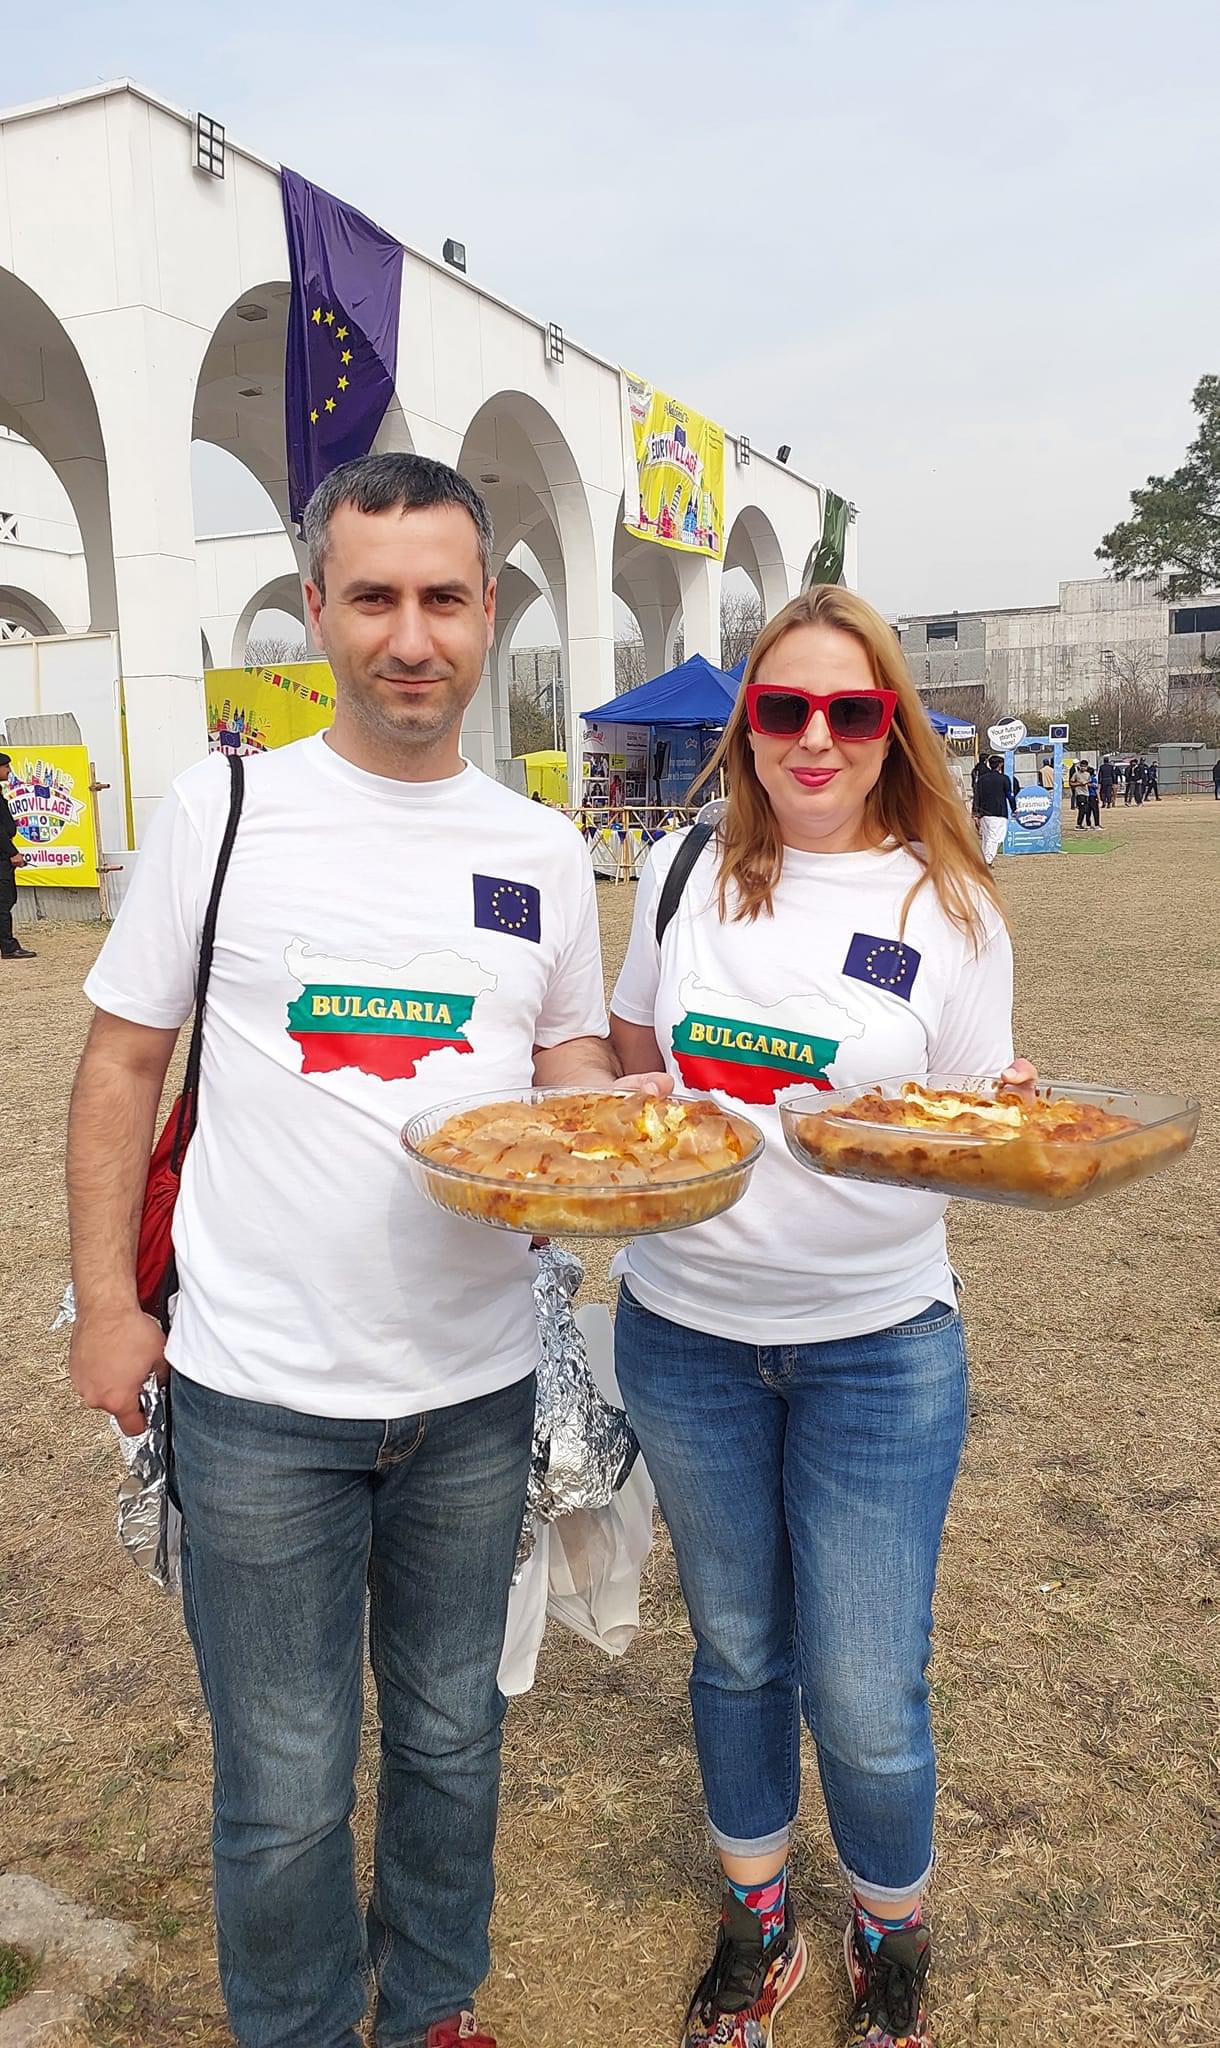 On 17 February 2024 the Embassy of Bulgaria participated in the EuroVillage festival in Islamabad